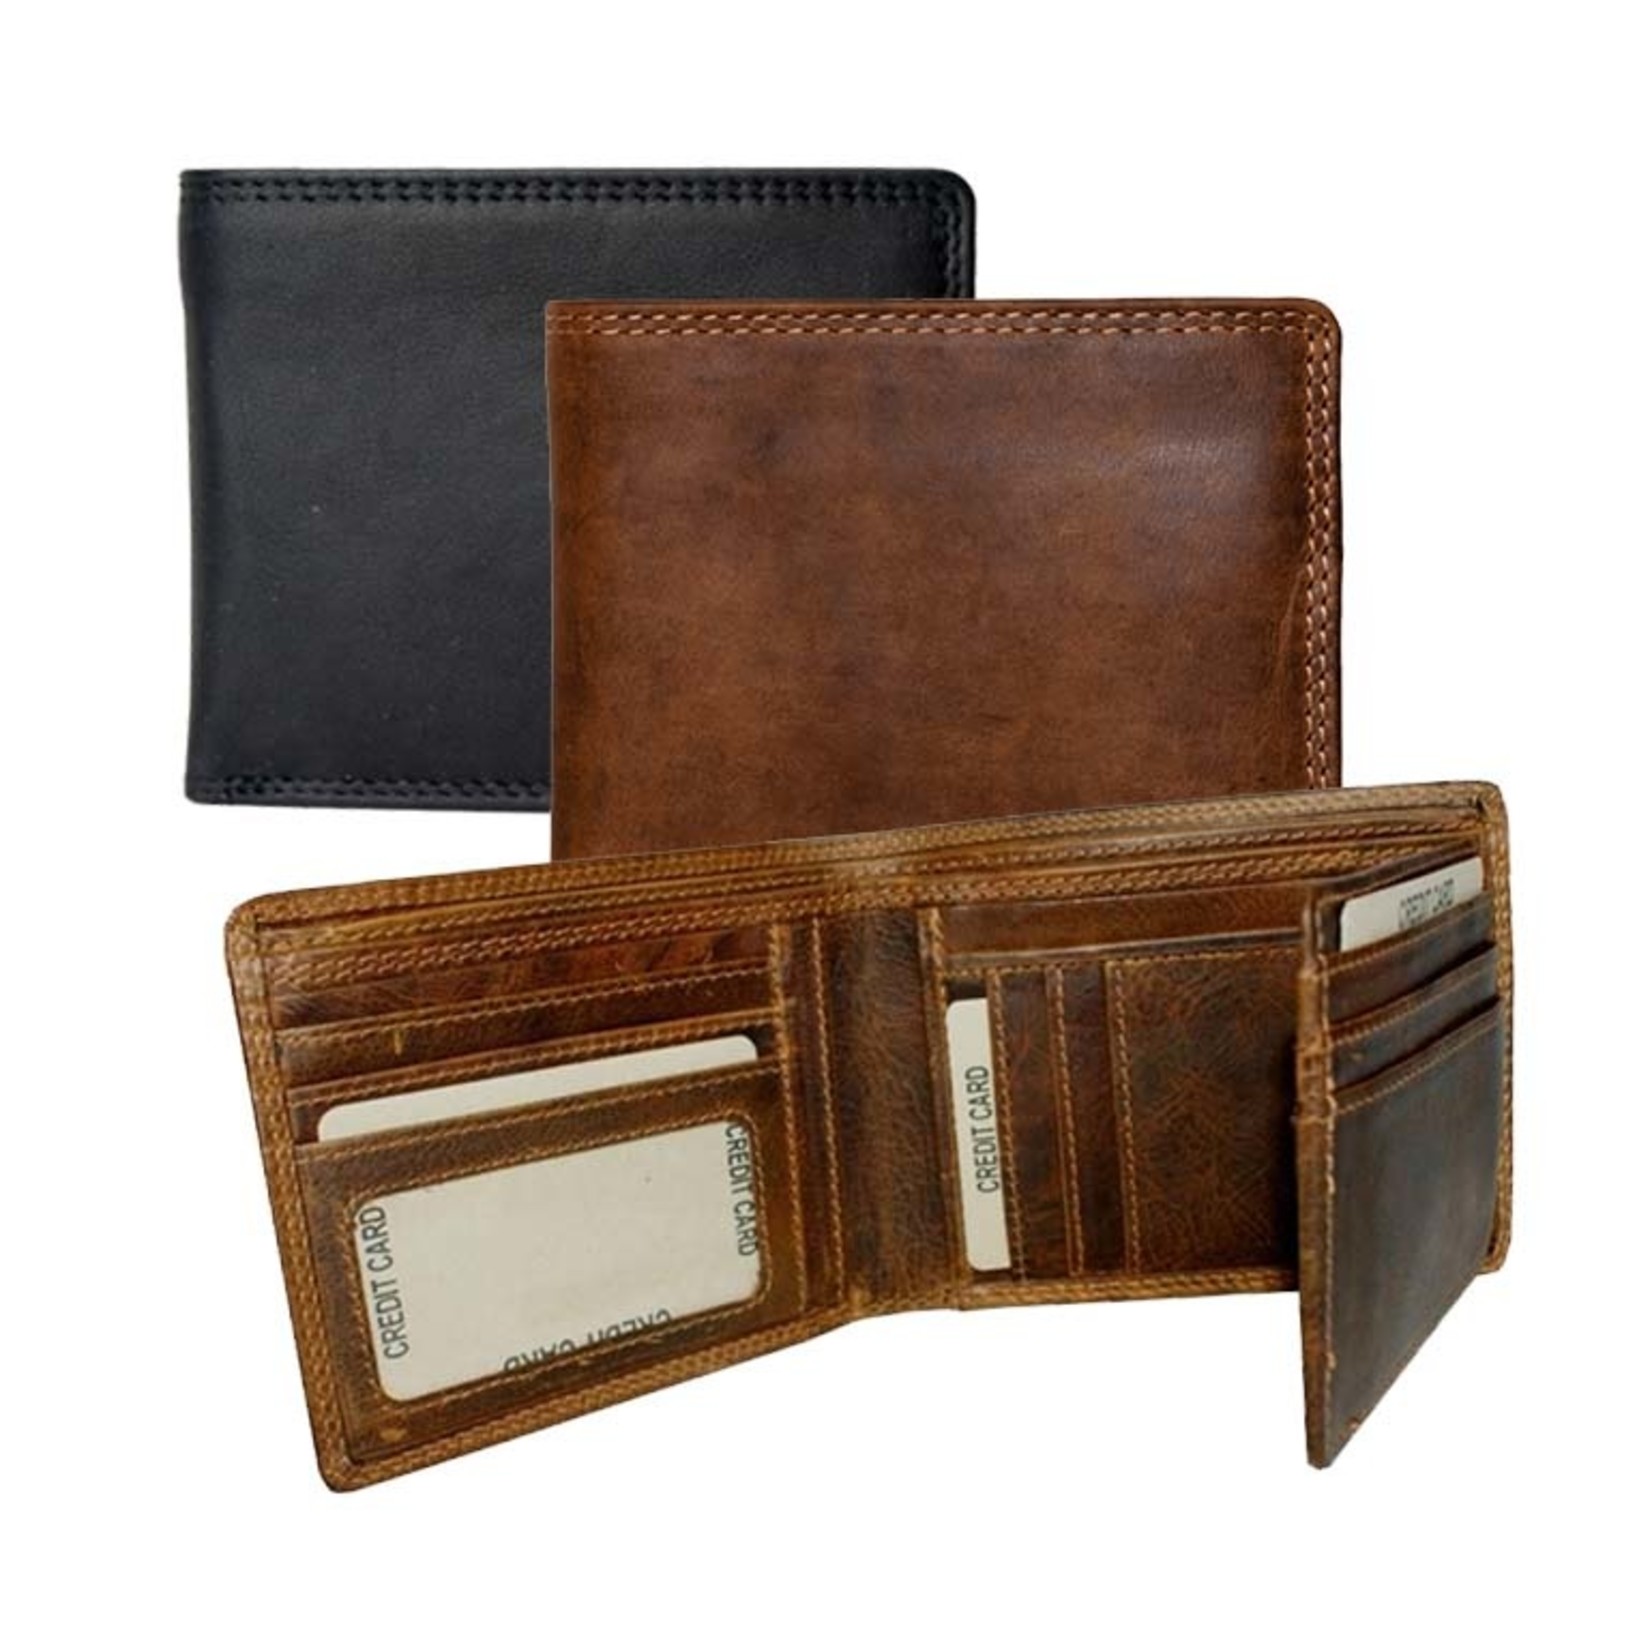 Rugged Earth Leather Billfold Wallet with Right Card Flap